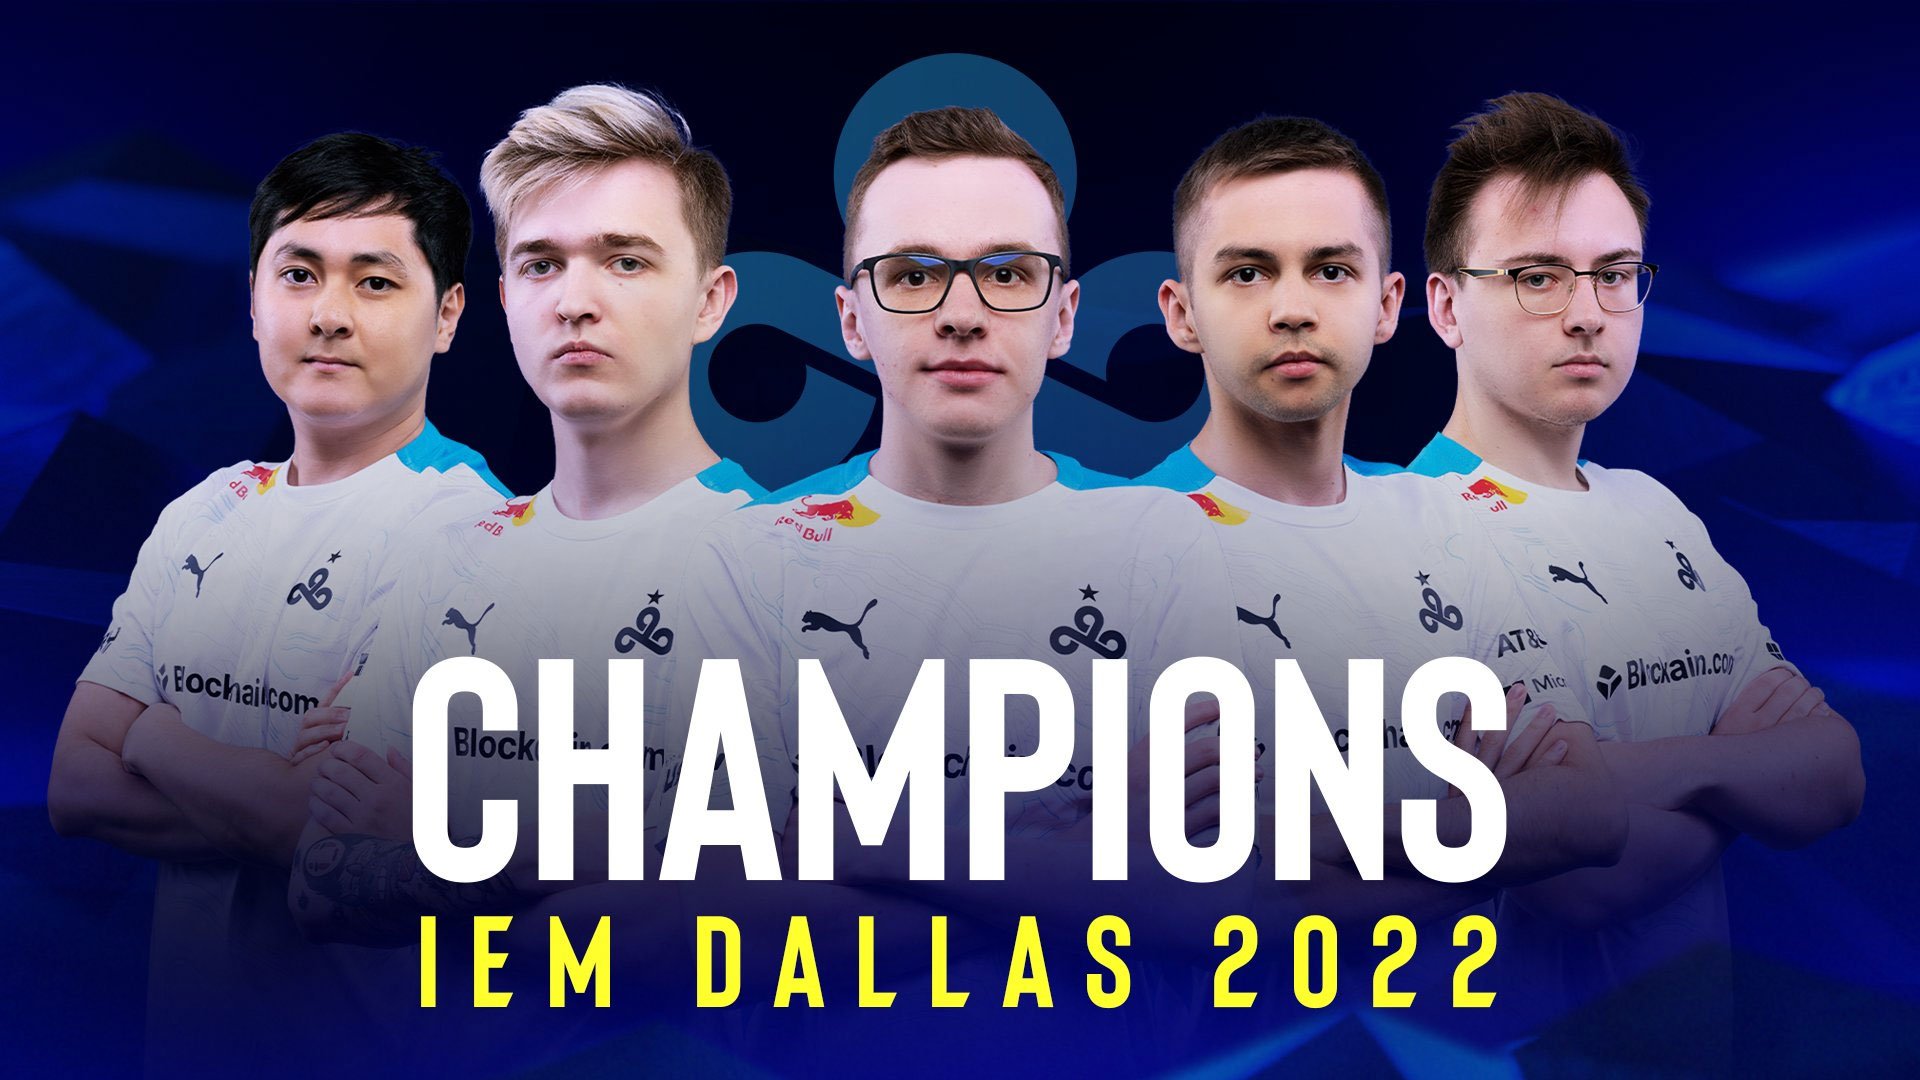 Cloud9 sweep ENCE in grand finals to win IEM Dallas 2022, collect first